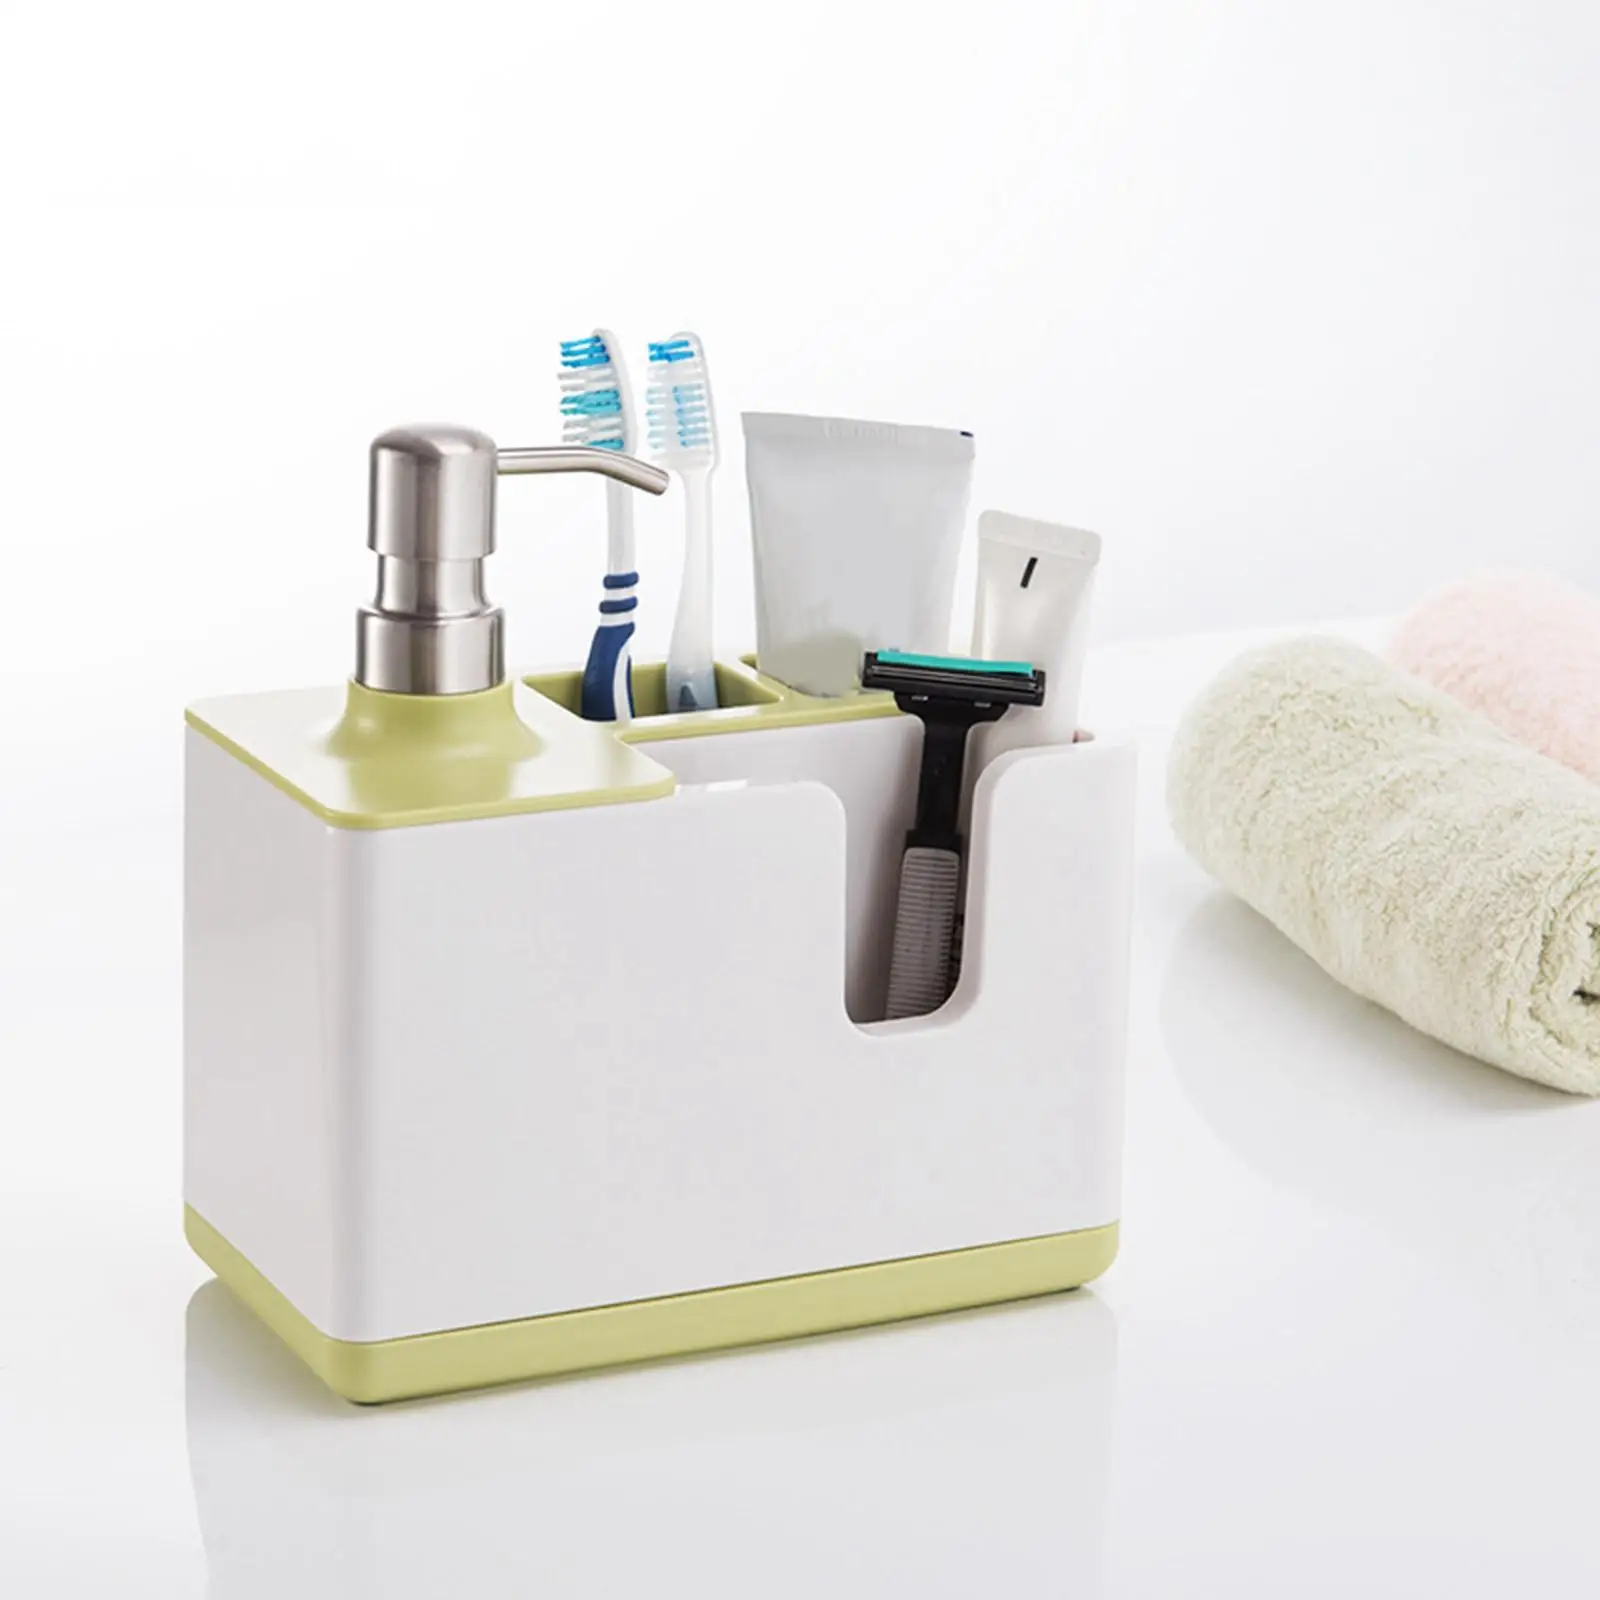 Plastic Kitchen Sink Caddy with Soap Dispenser Pump for Brushes Countertop